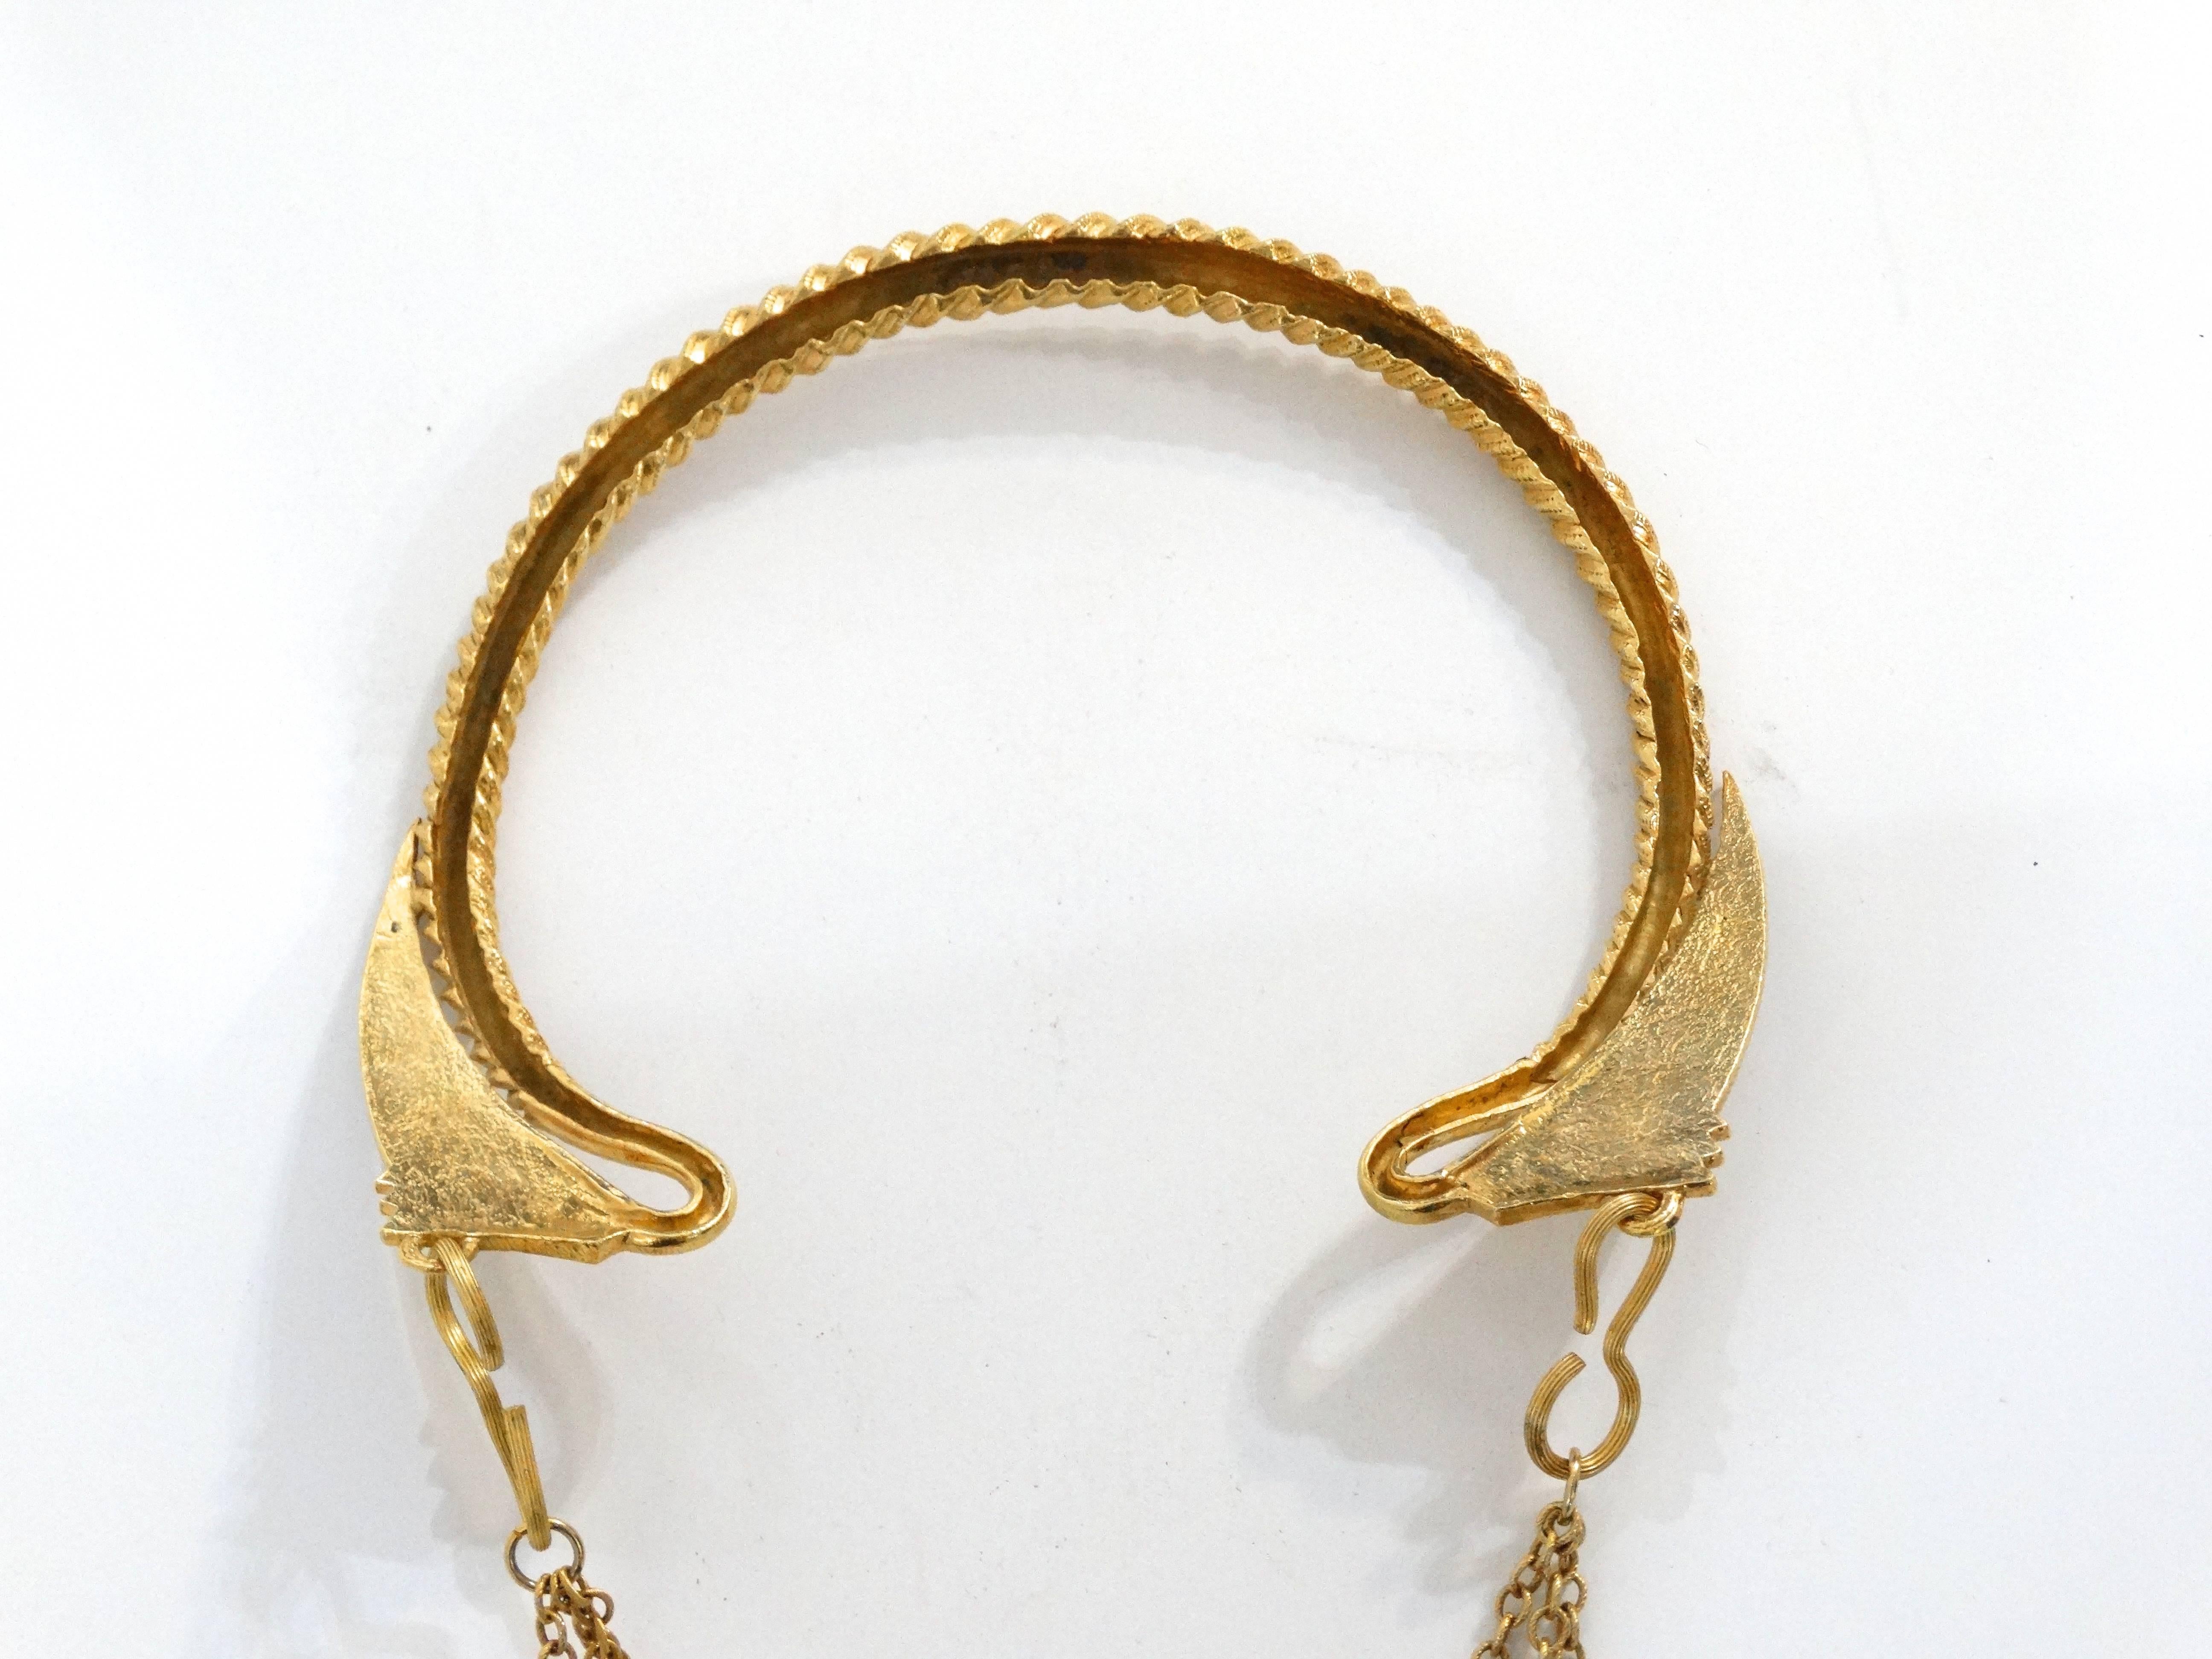 1970s Egyptian Revival Necklace Designed by Alexis Kirk  3